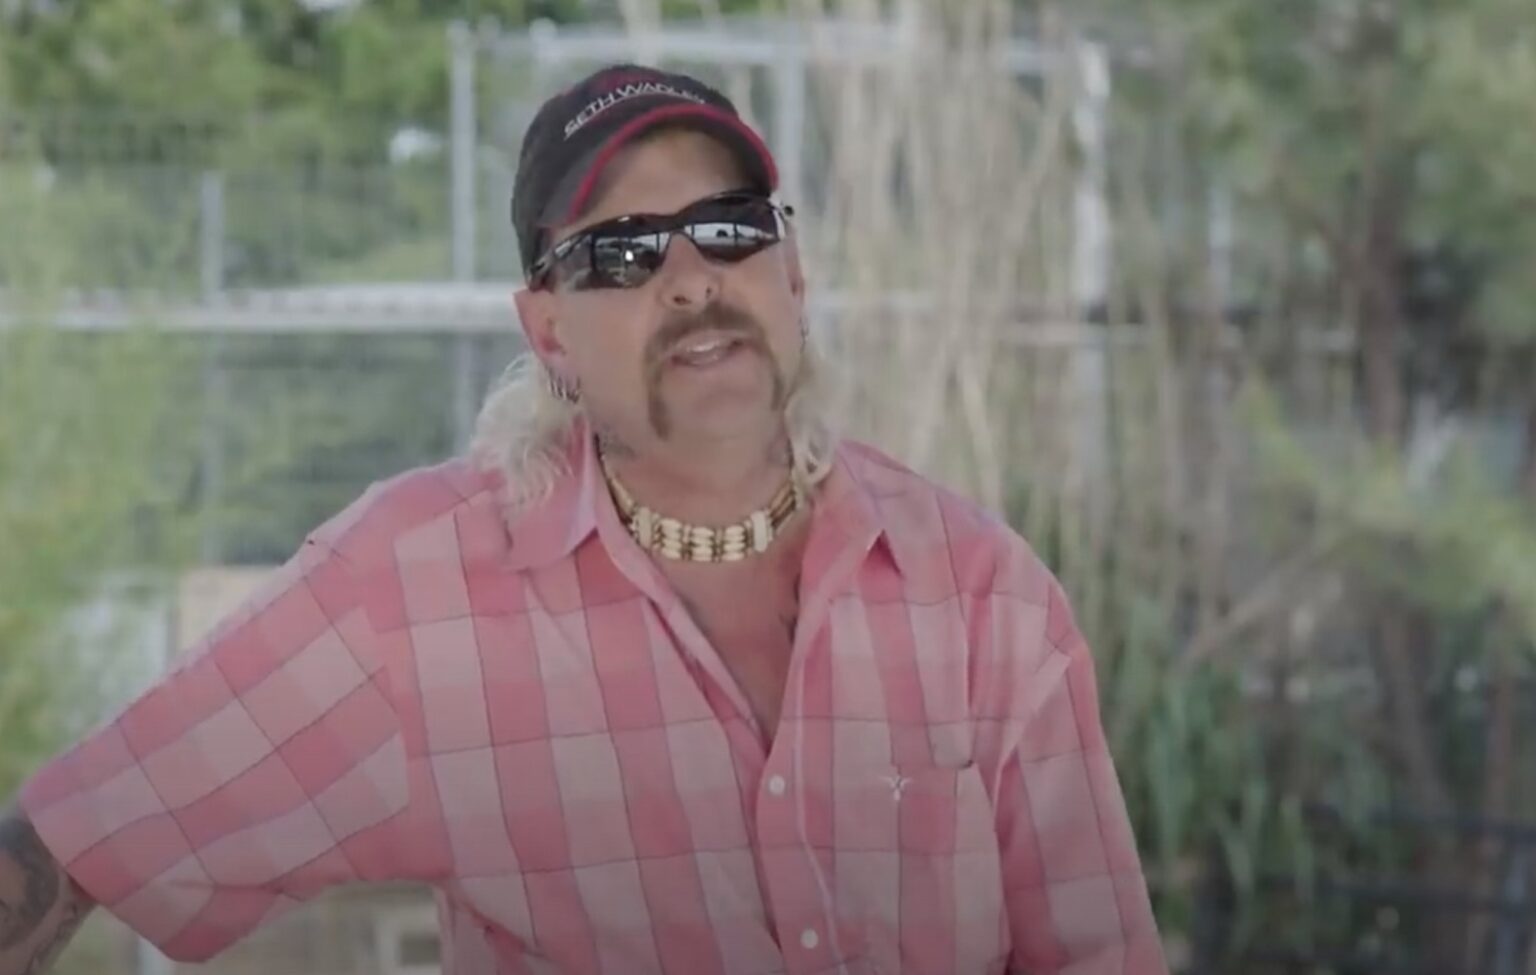 Joe Exotic was the true star of 'Tiger King' but will the convicted felon make an appearance in season 2 of the hit Netflix show?